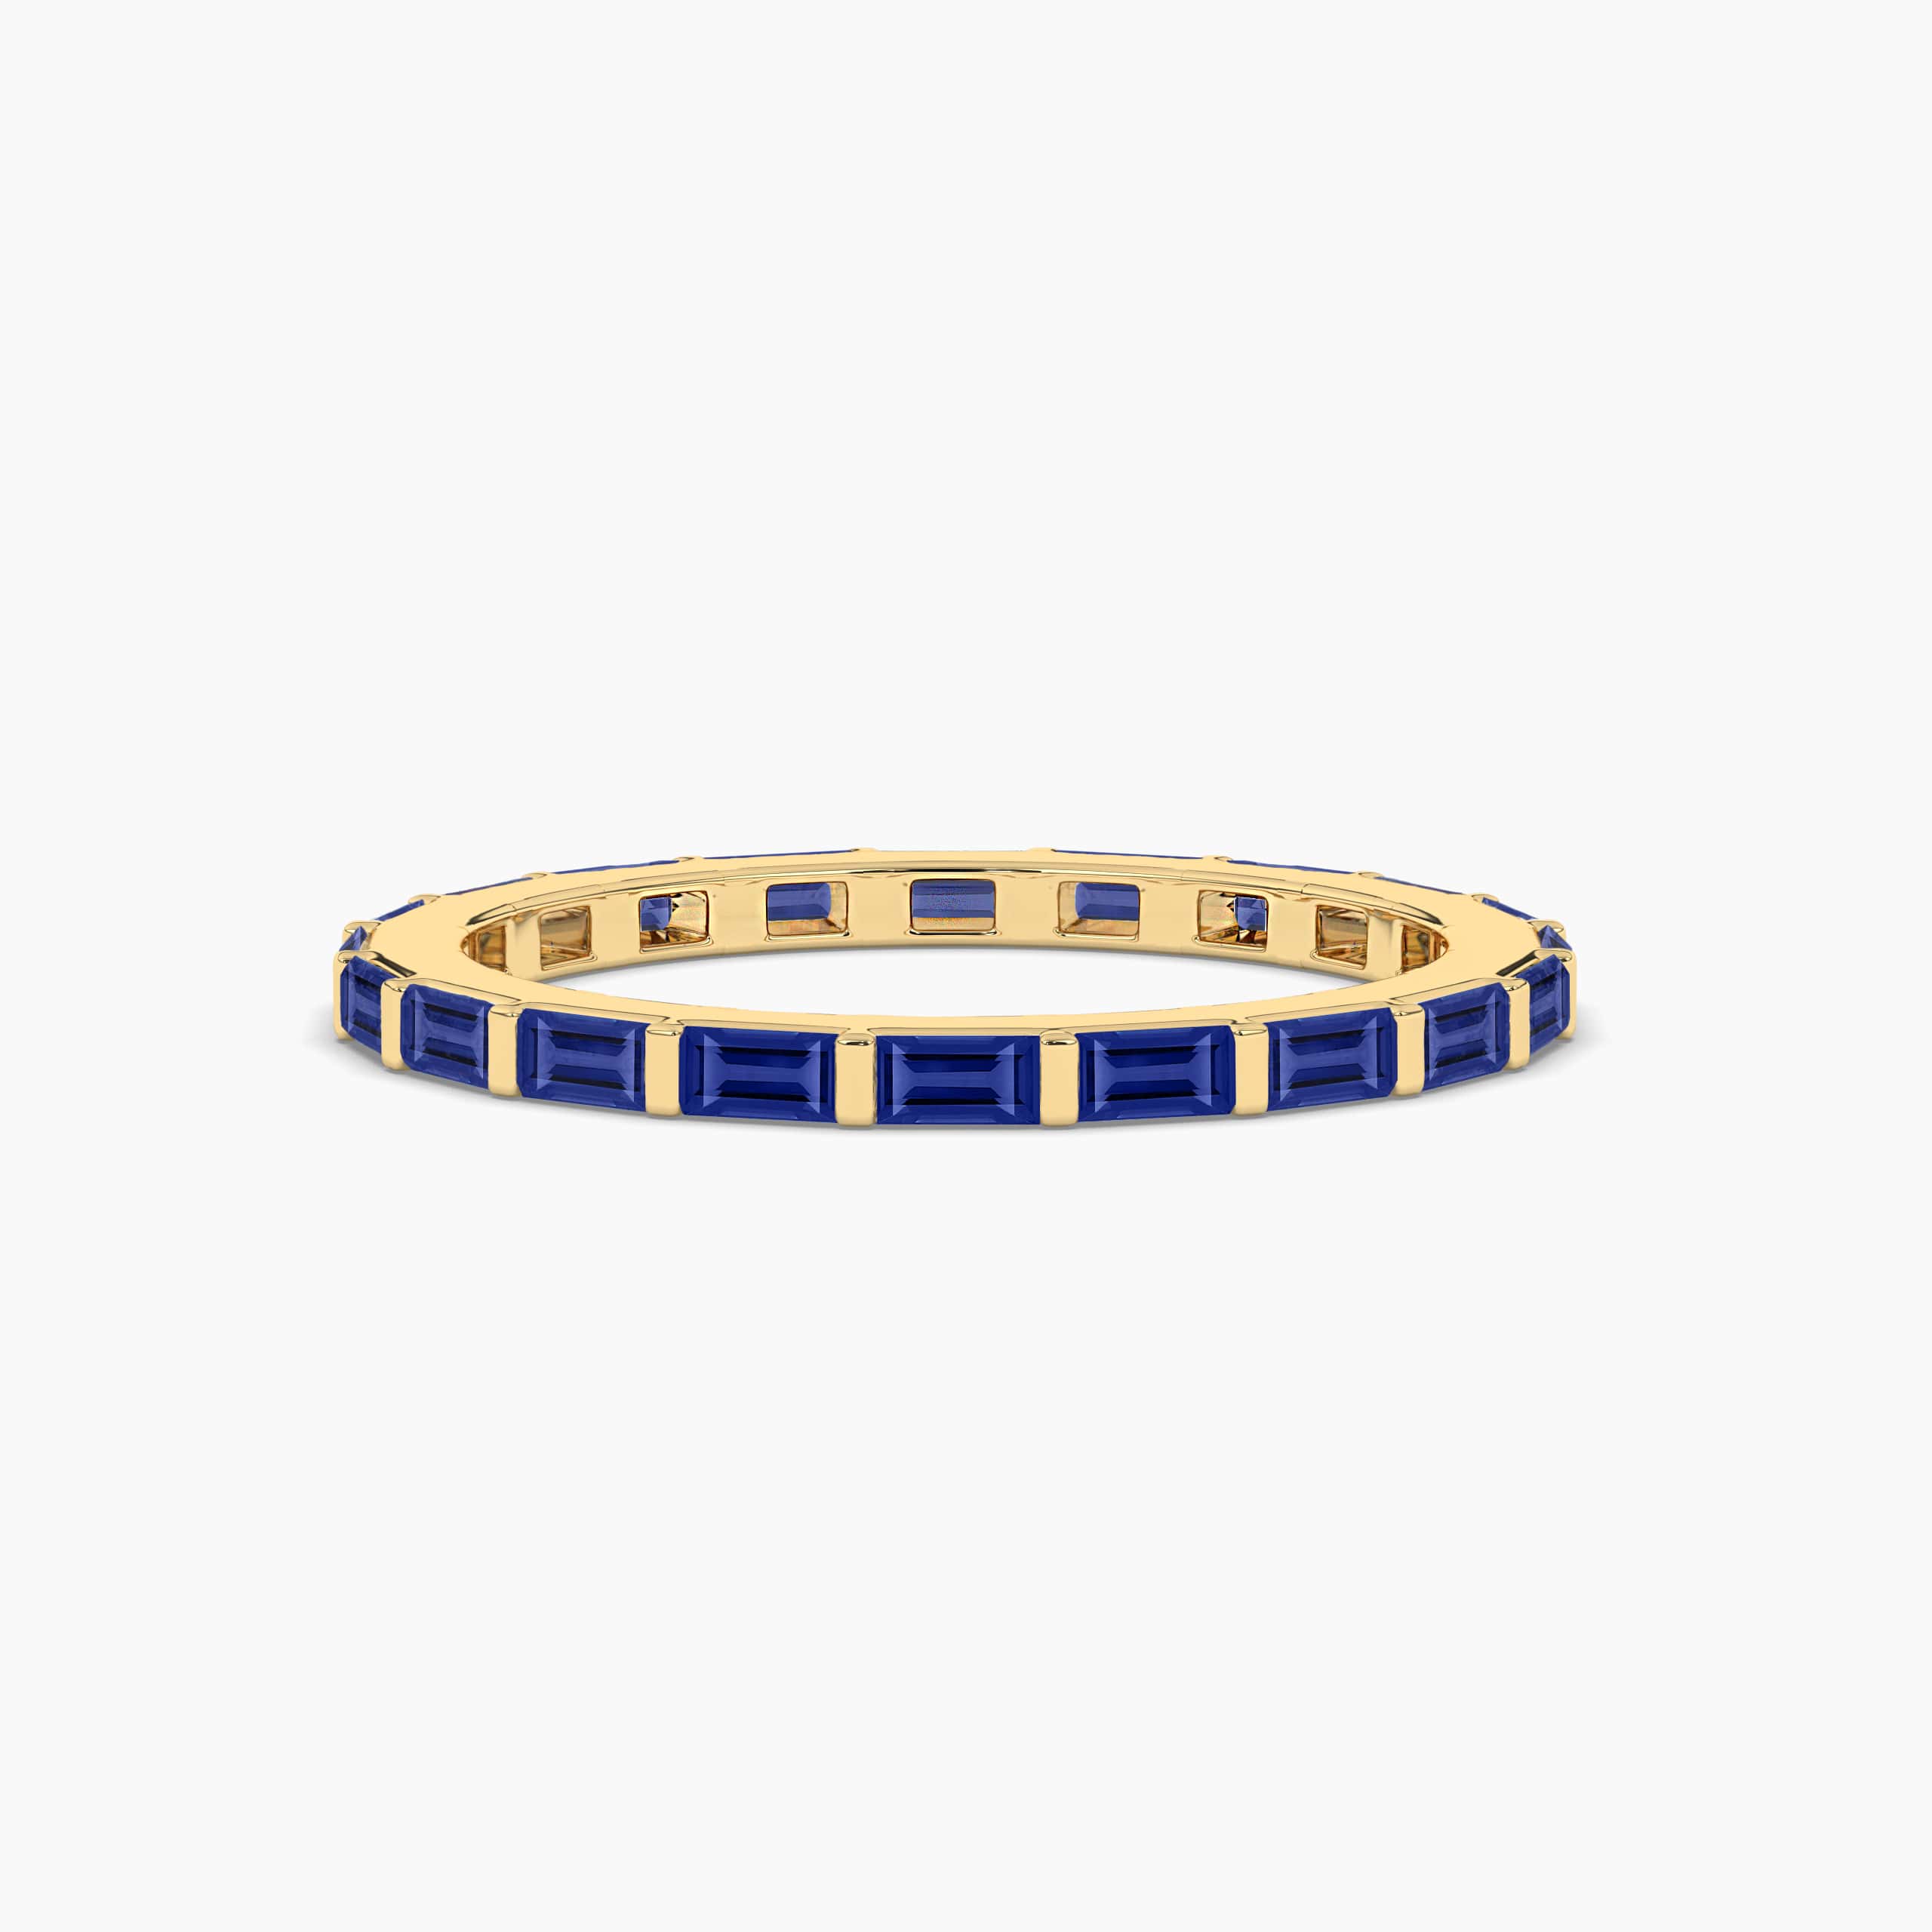 BLUE SAPPHIRE BADUETTE IN YELLOW GOLD